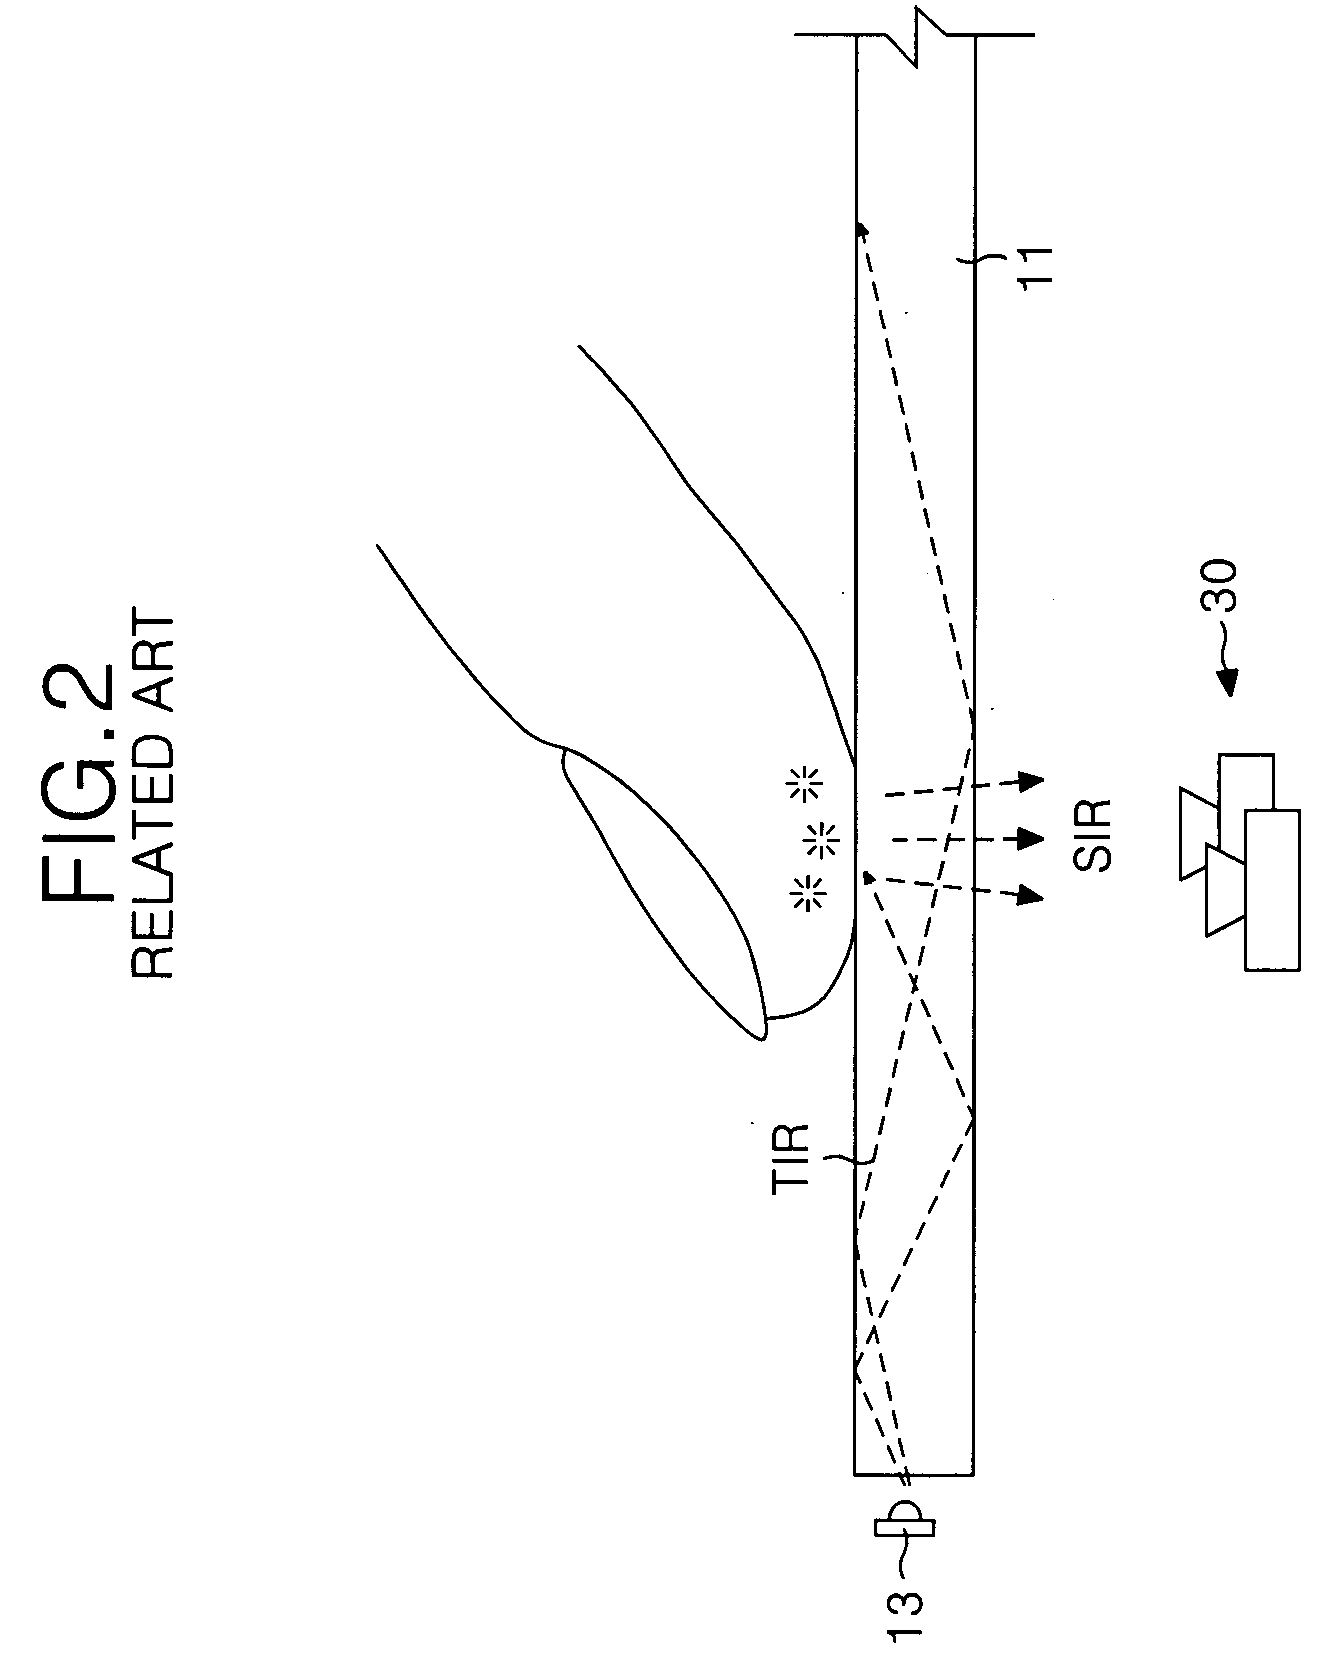 Display with infrared backlight source and multi-touch sensing function